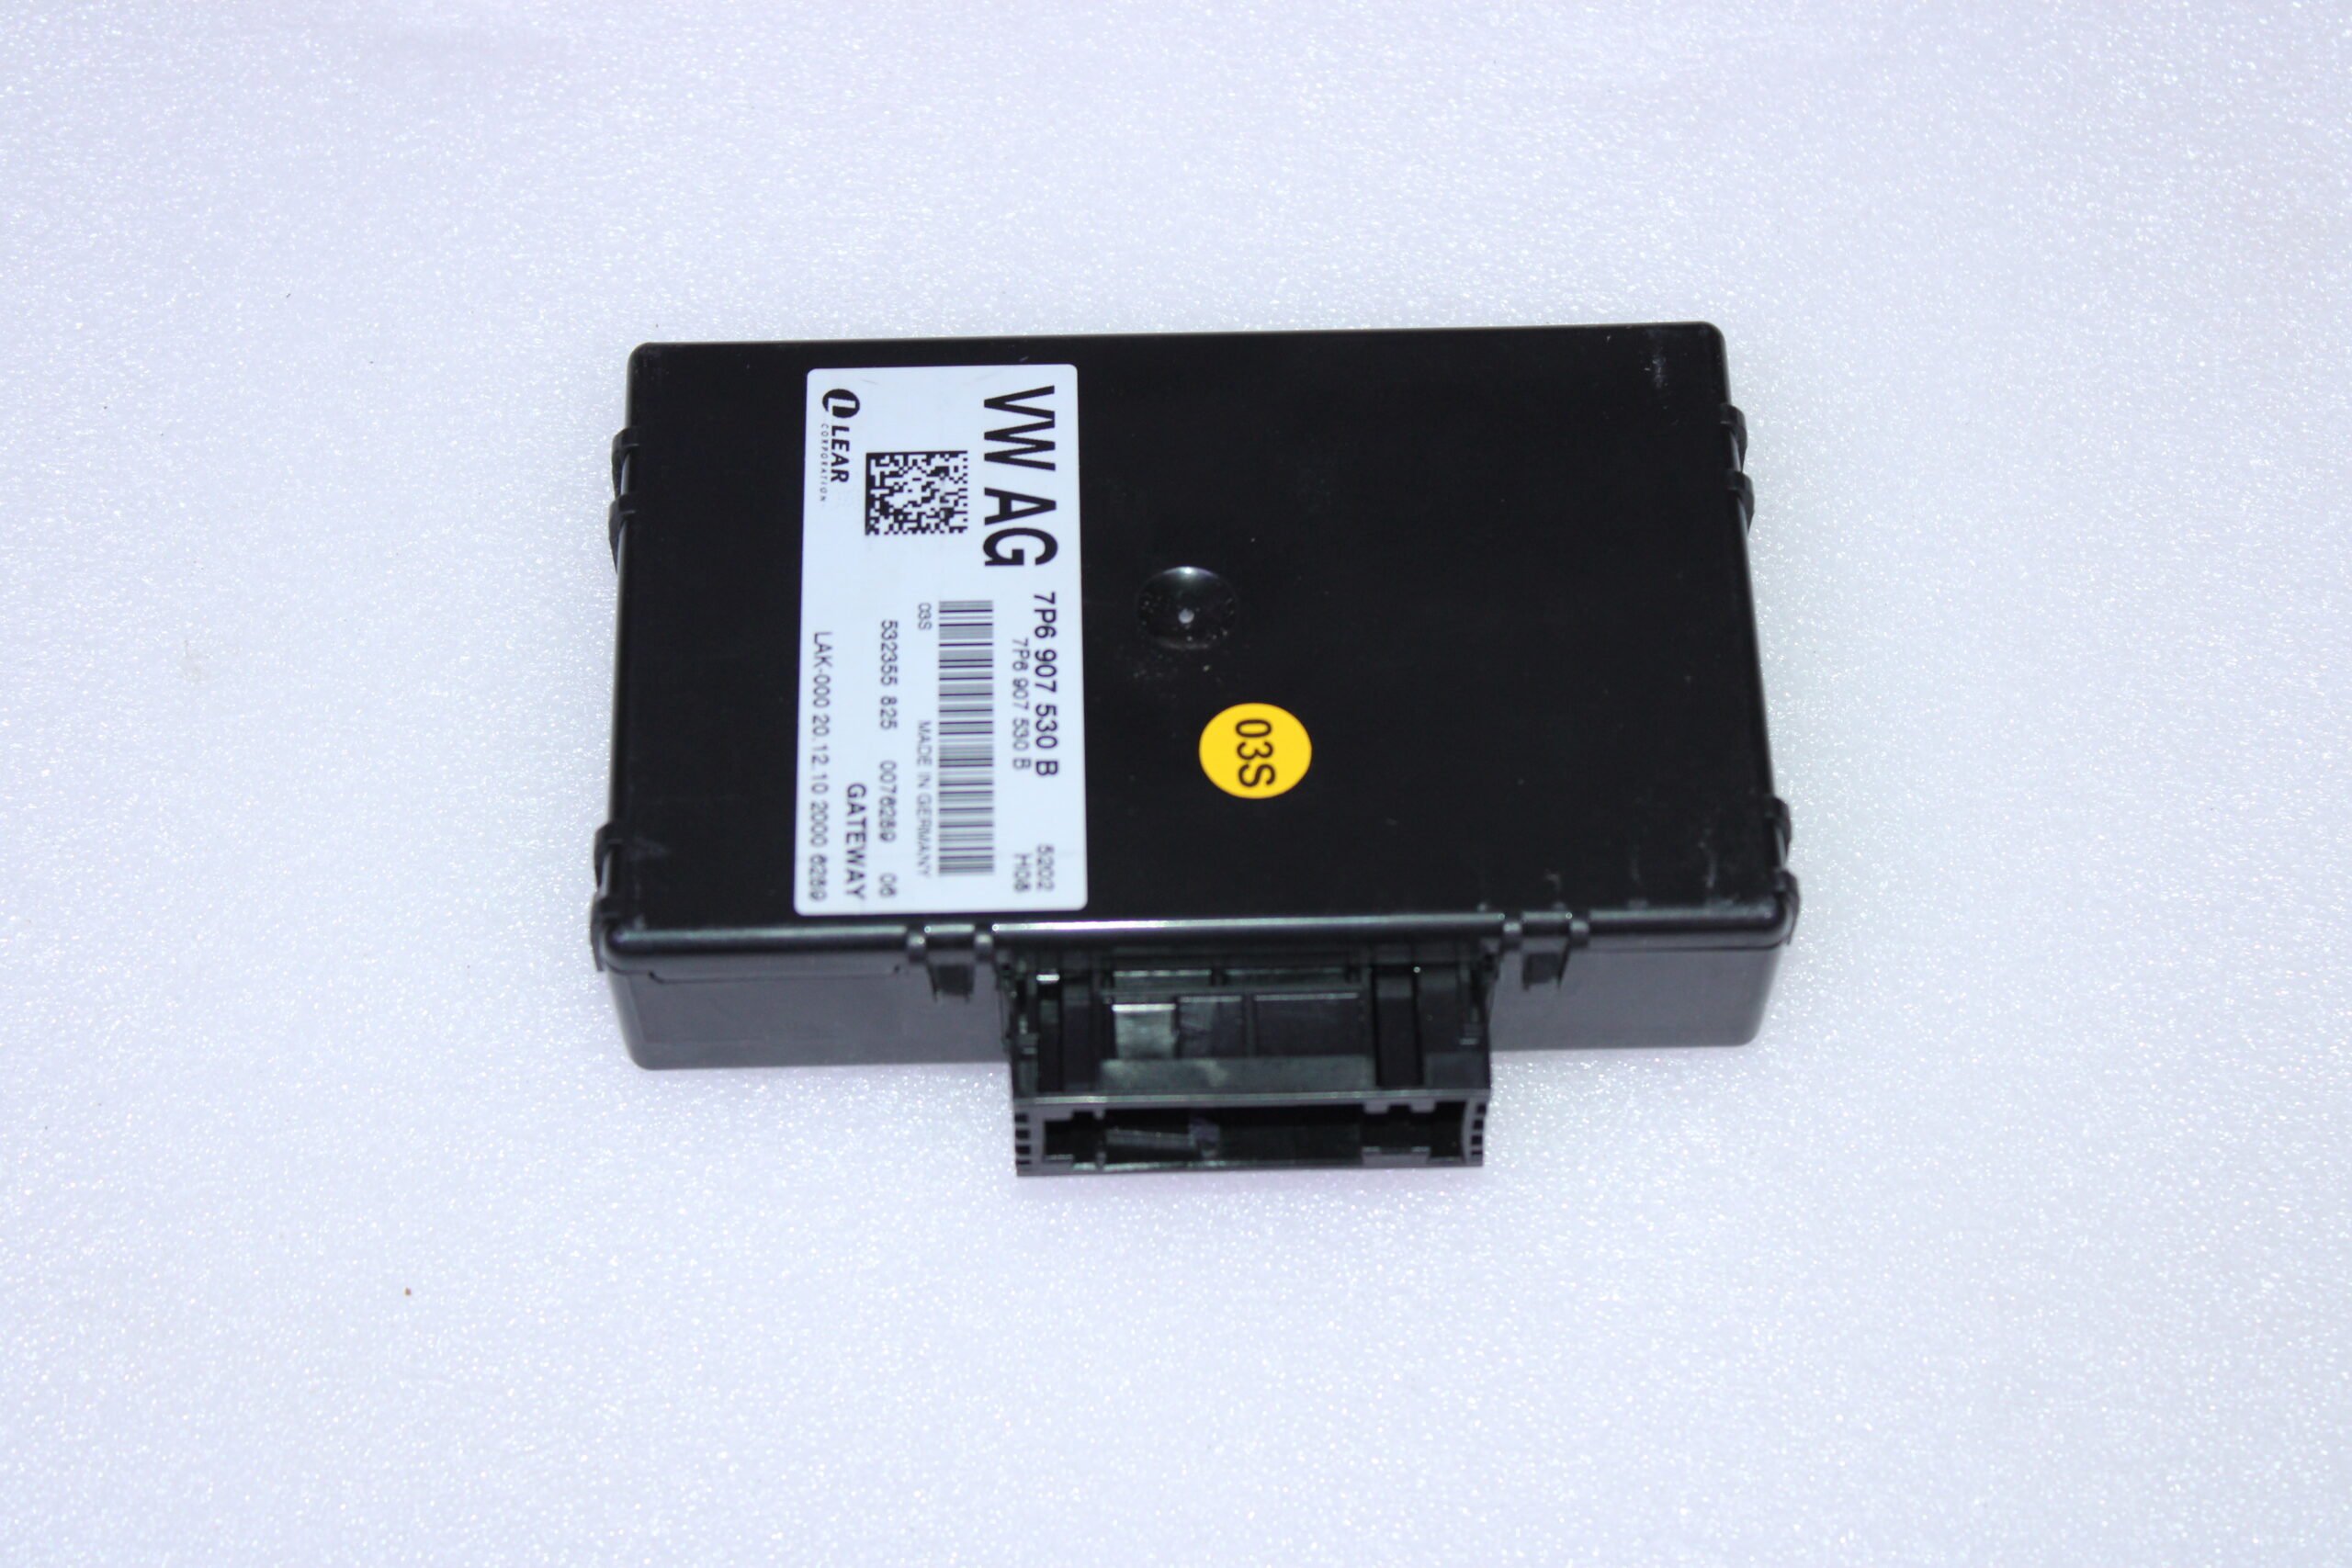 VOLKSWAGEN DIAGNOSIS INTERFACE FOR DATA BUS 7P6907530B